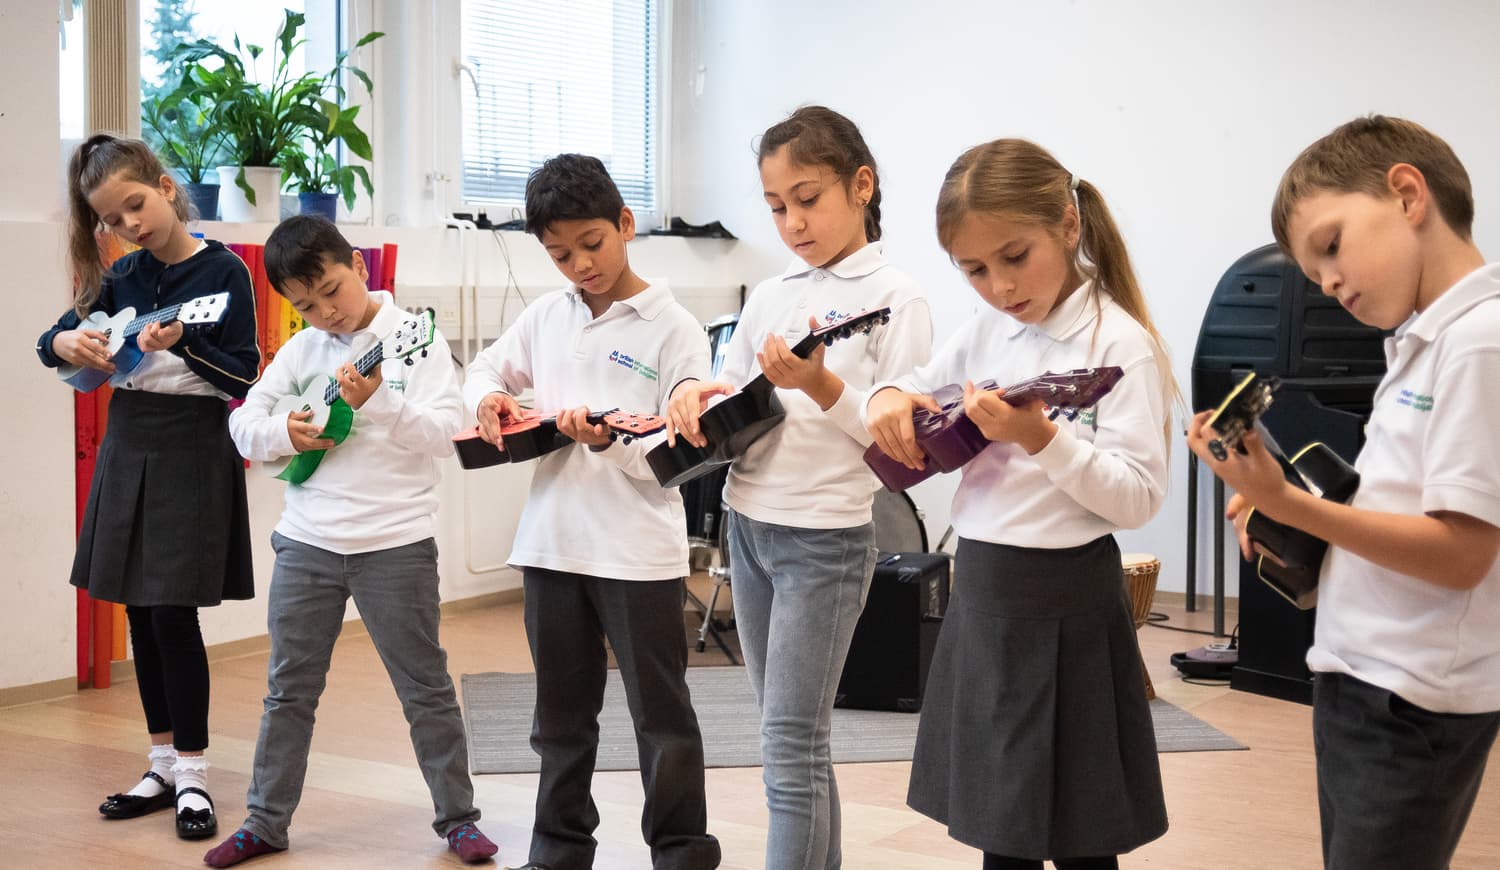 Students playing instruments in school